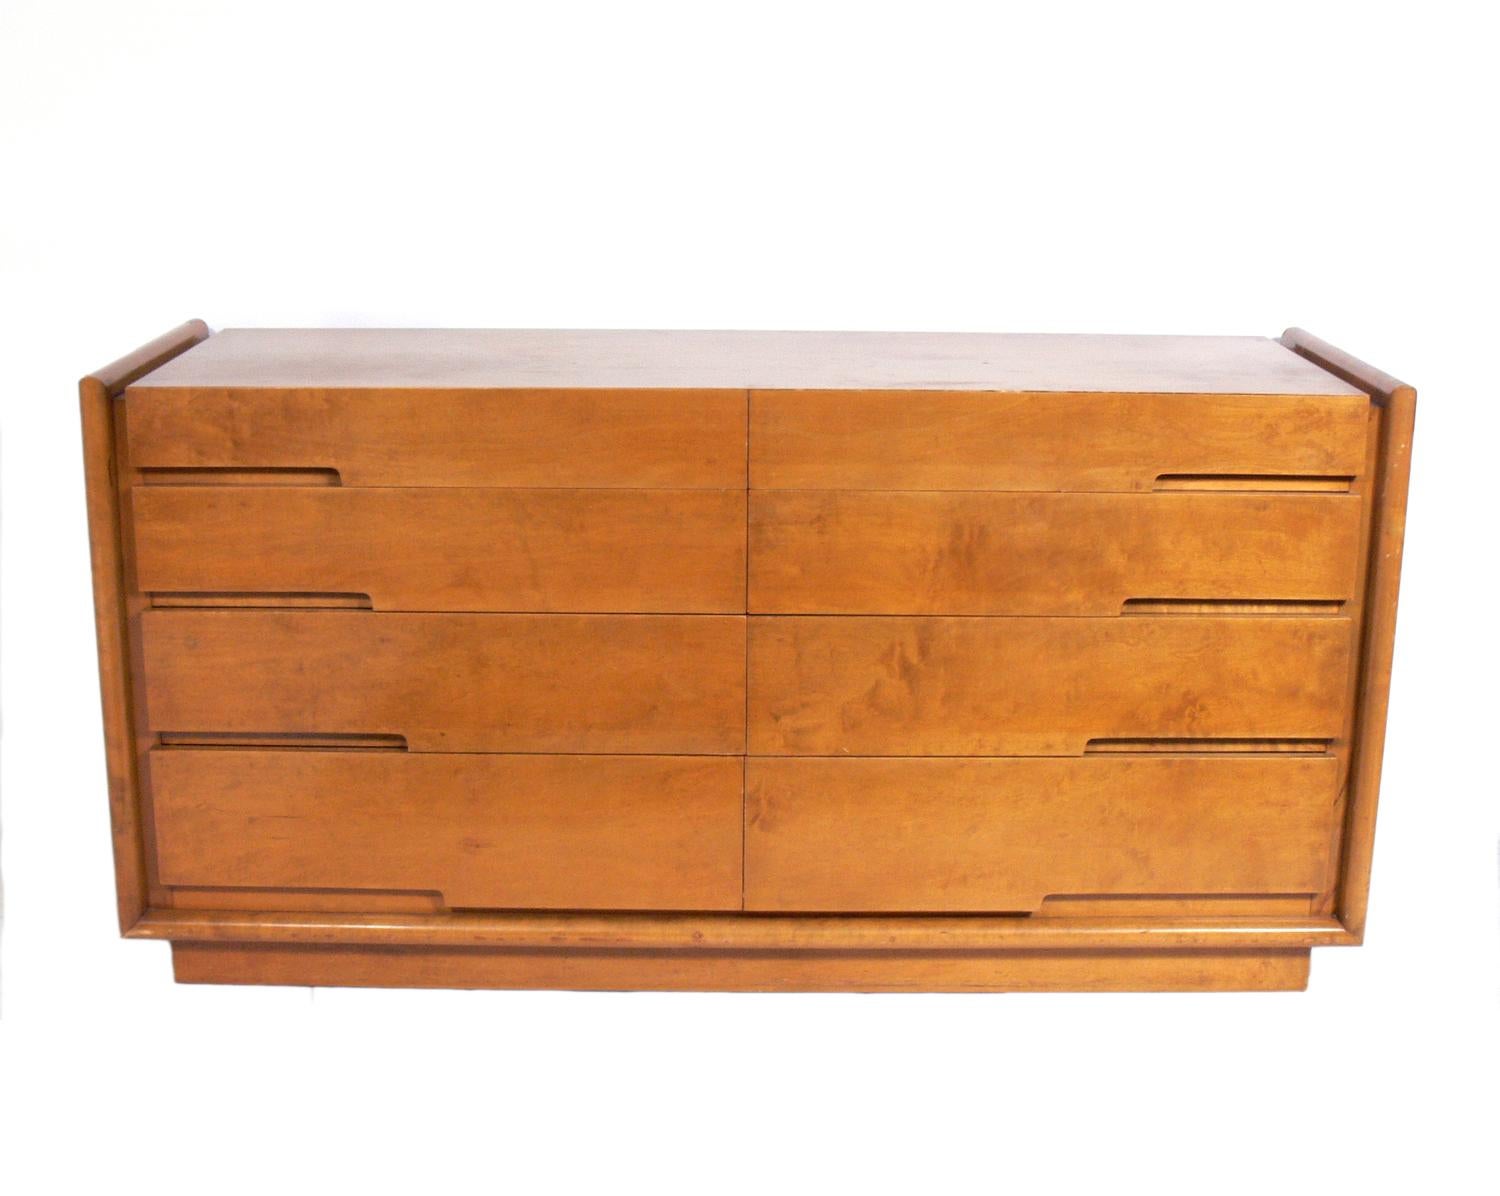 Clean lined Mid-Century Modern dresser or chest, designed by Edmund Spence, Sweden, circa 1960s. This chest is currently being refinished and can be completed in your choice of color. The price noted below includes refinishing in your choice of